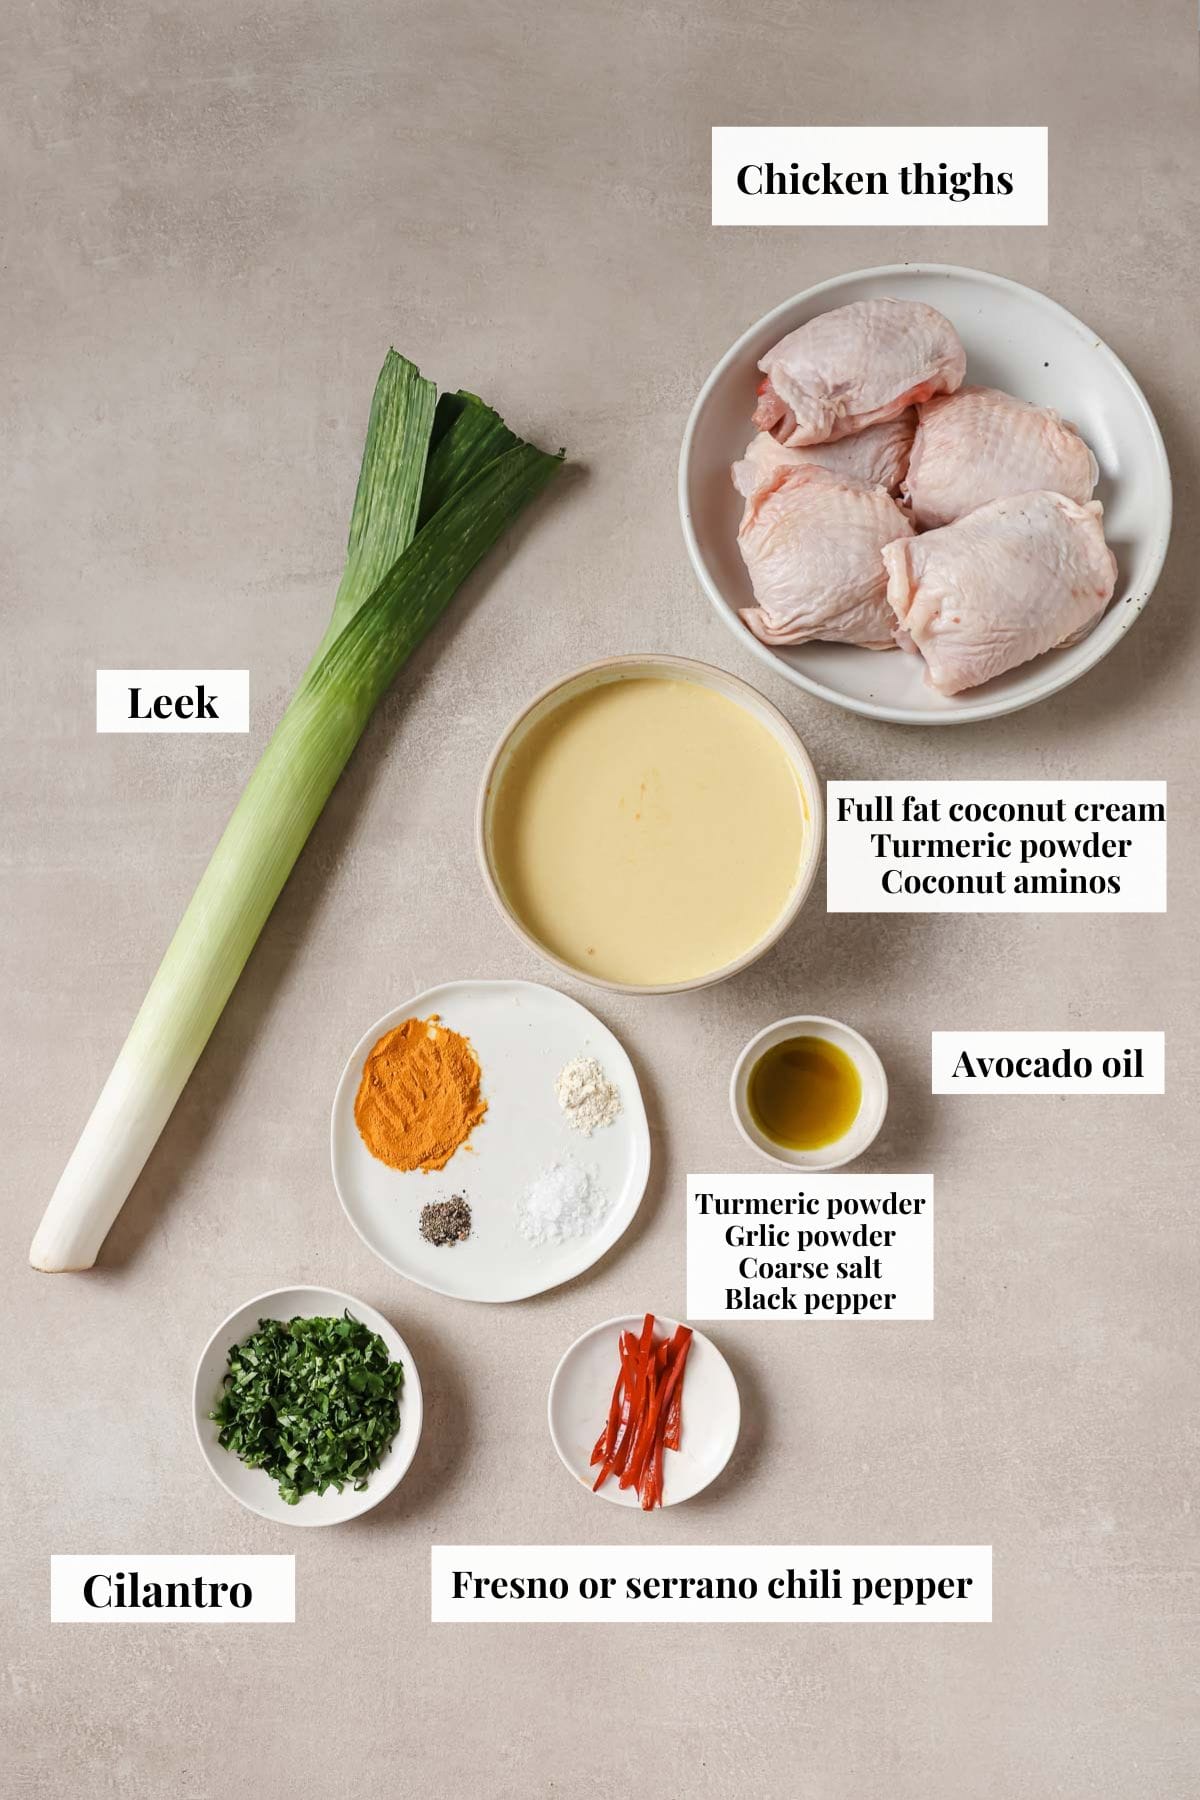 Photo shows ingredients needed to make recipe with chicken and leeks.